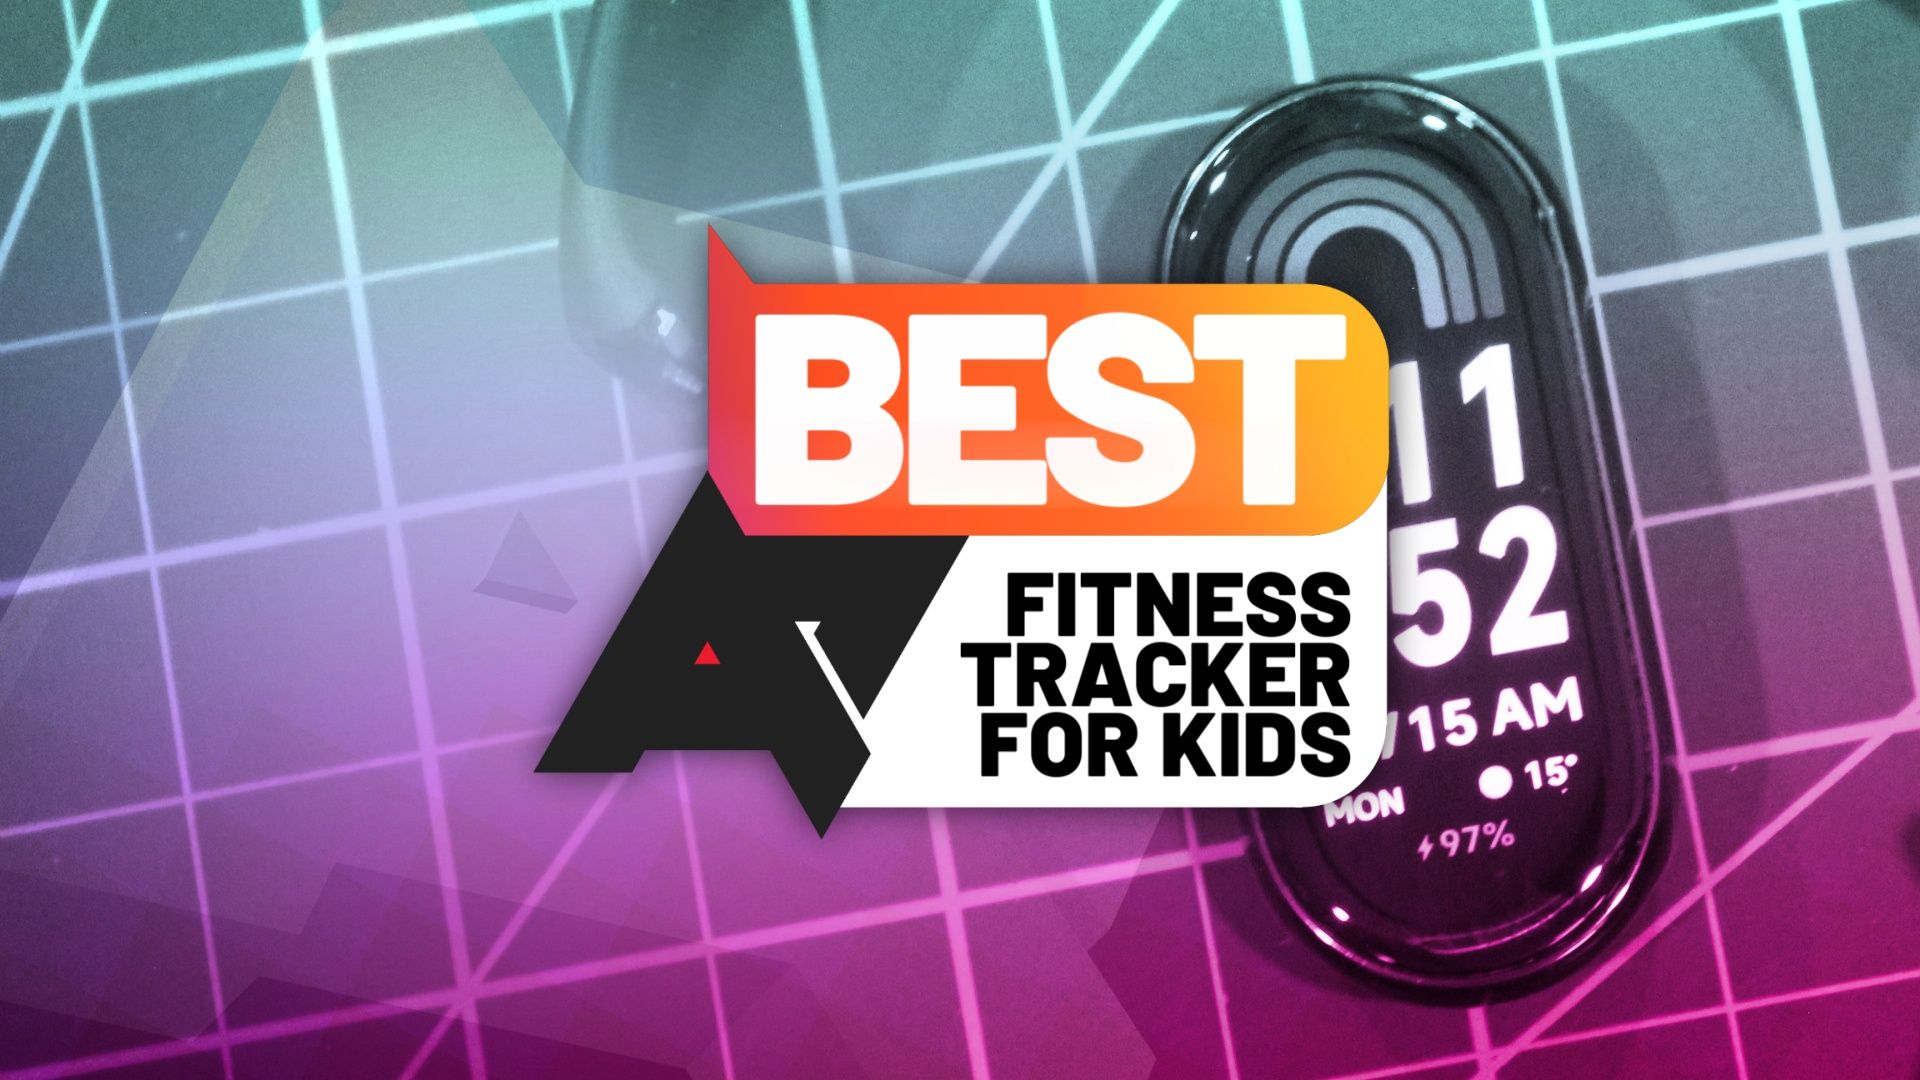 A photo of a fitness tracker body on a gridded background with an 'AP Best Fitness Tracker for Kids' logo in front